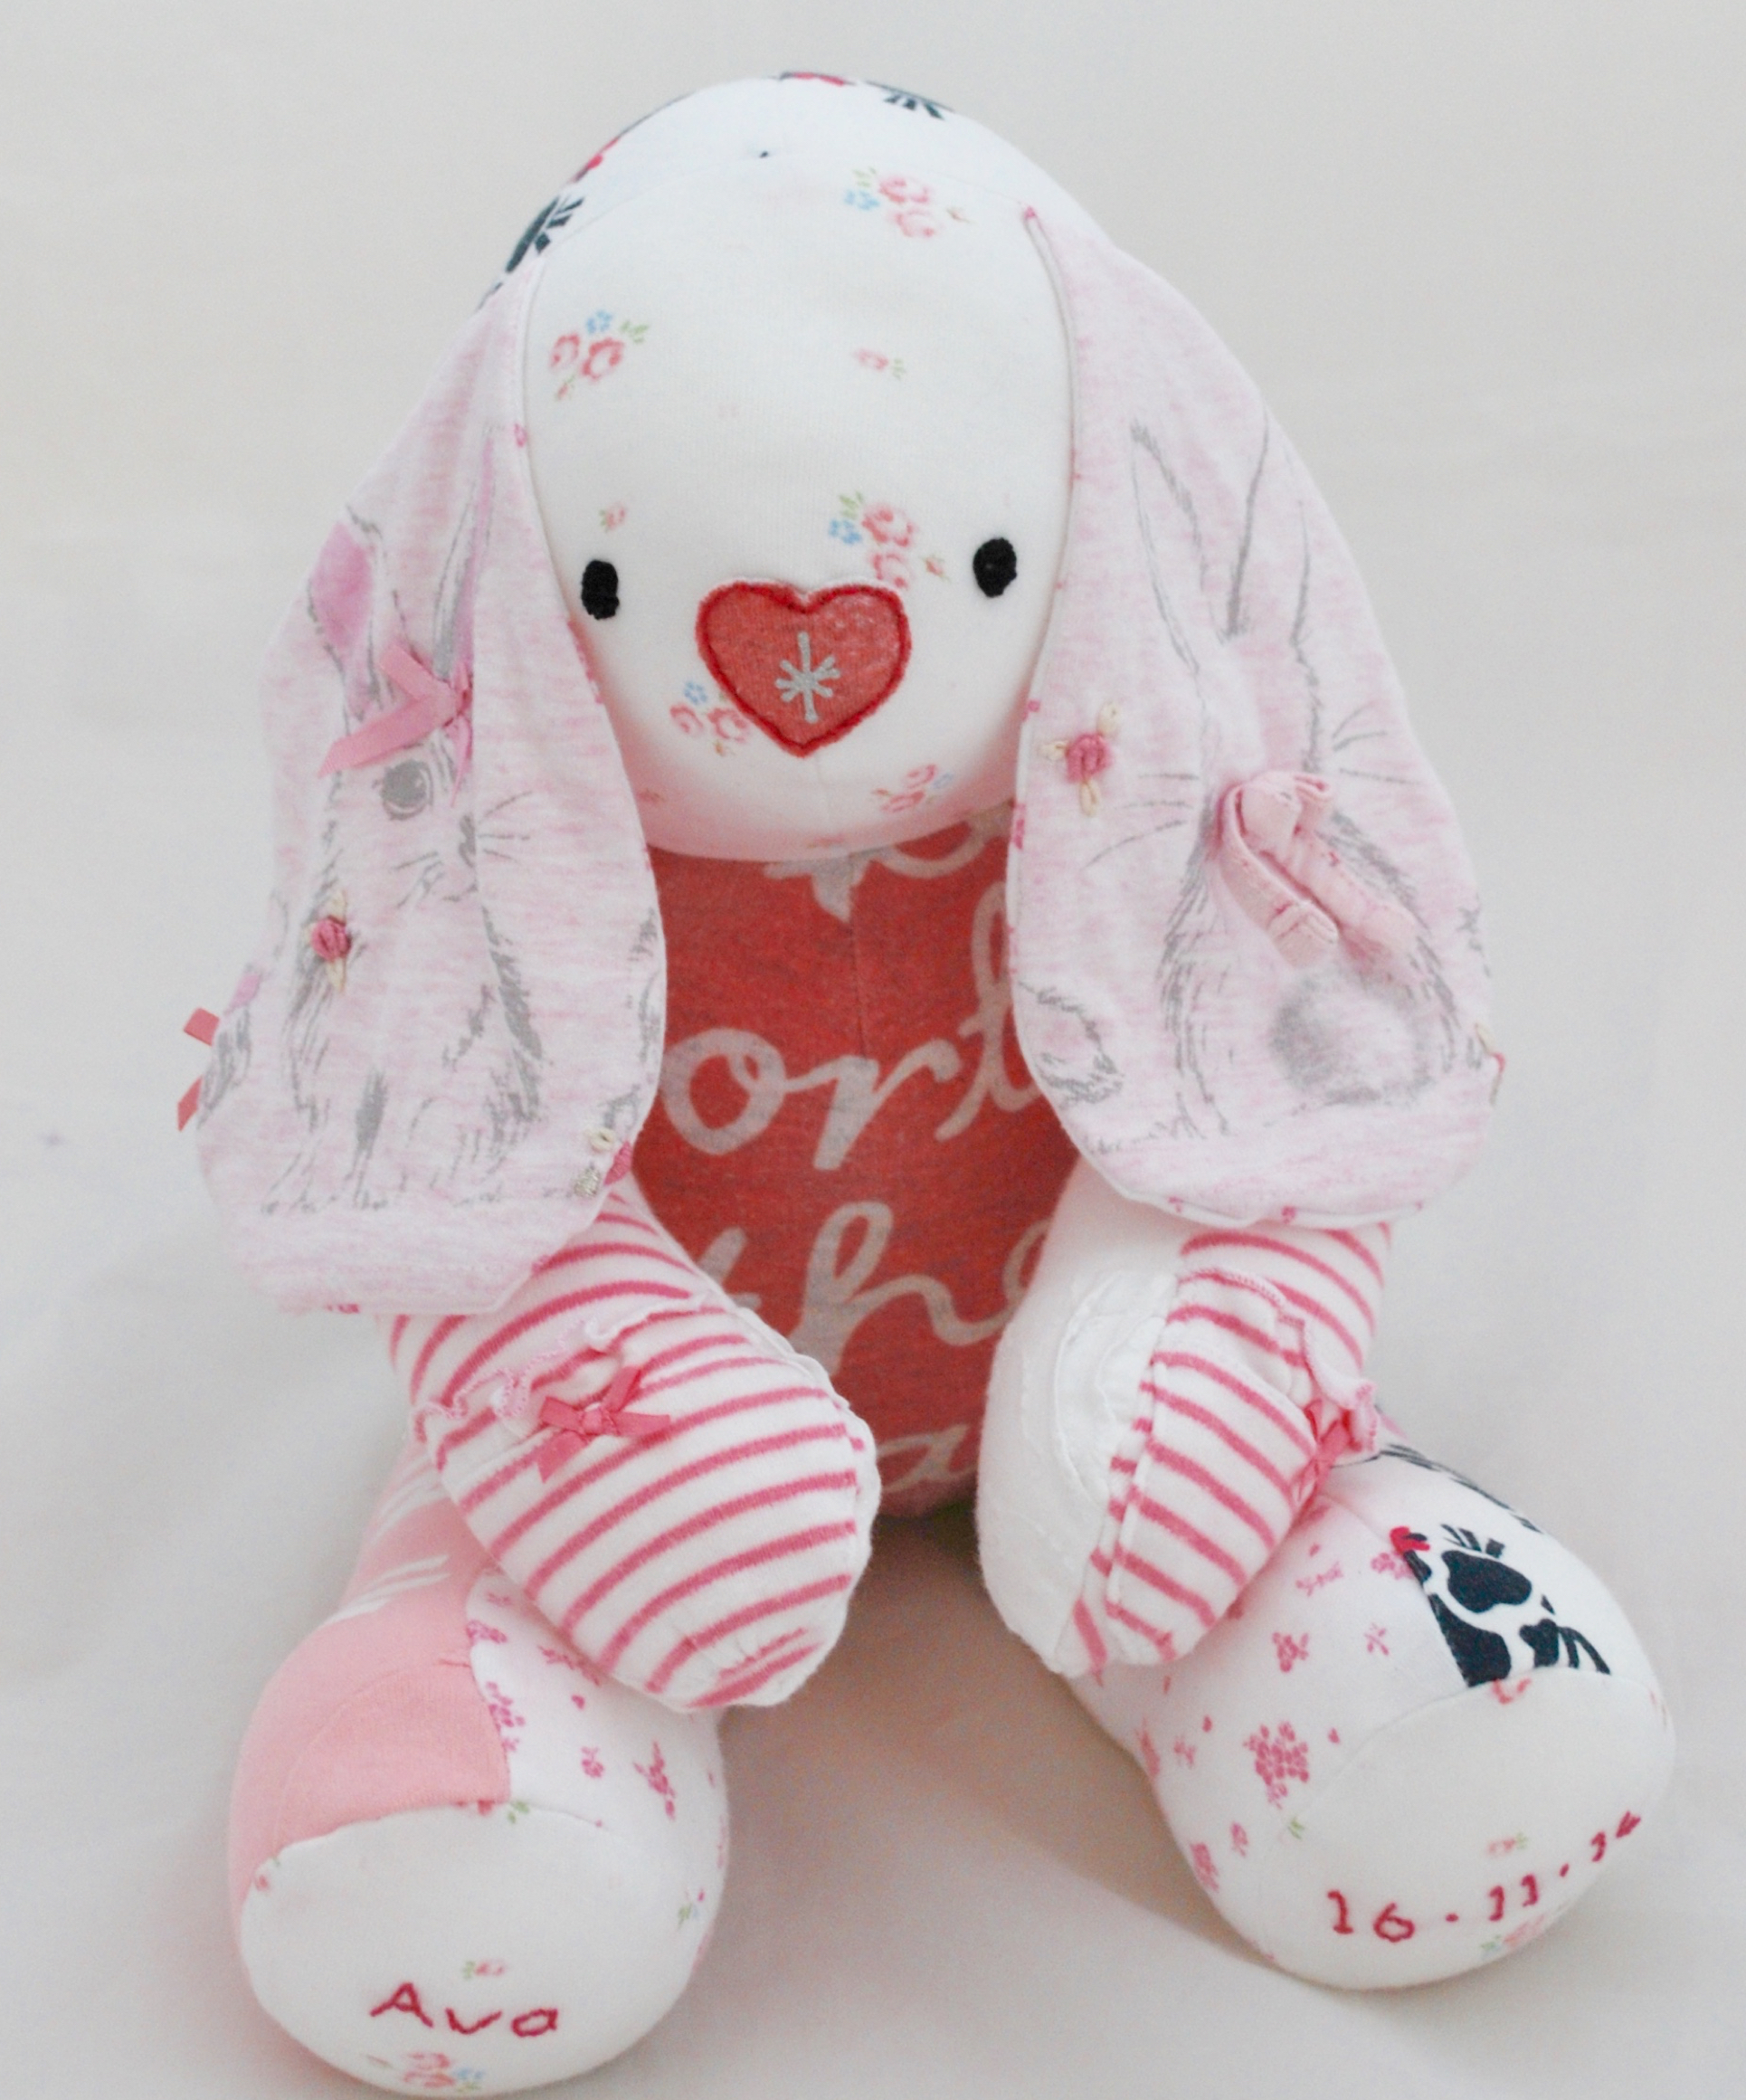 stuffed animal from baby clothes